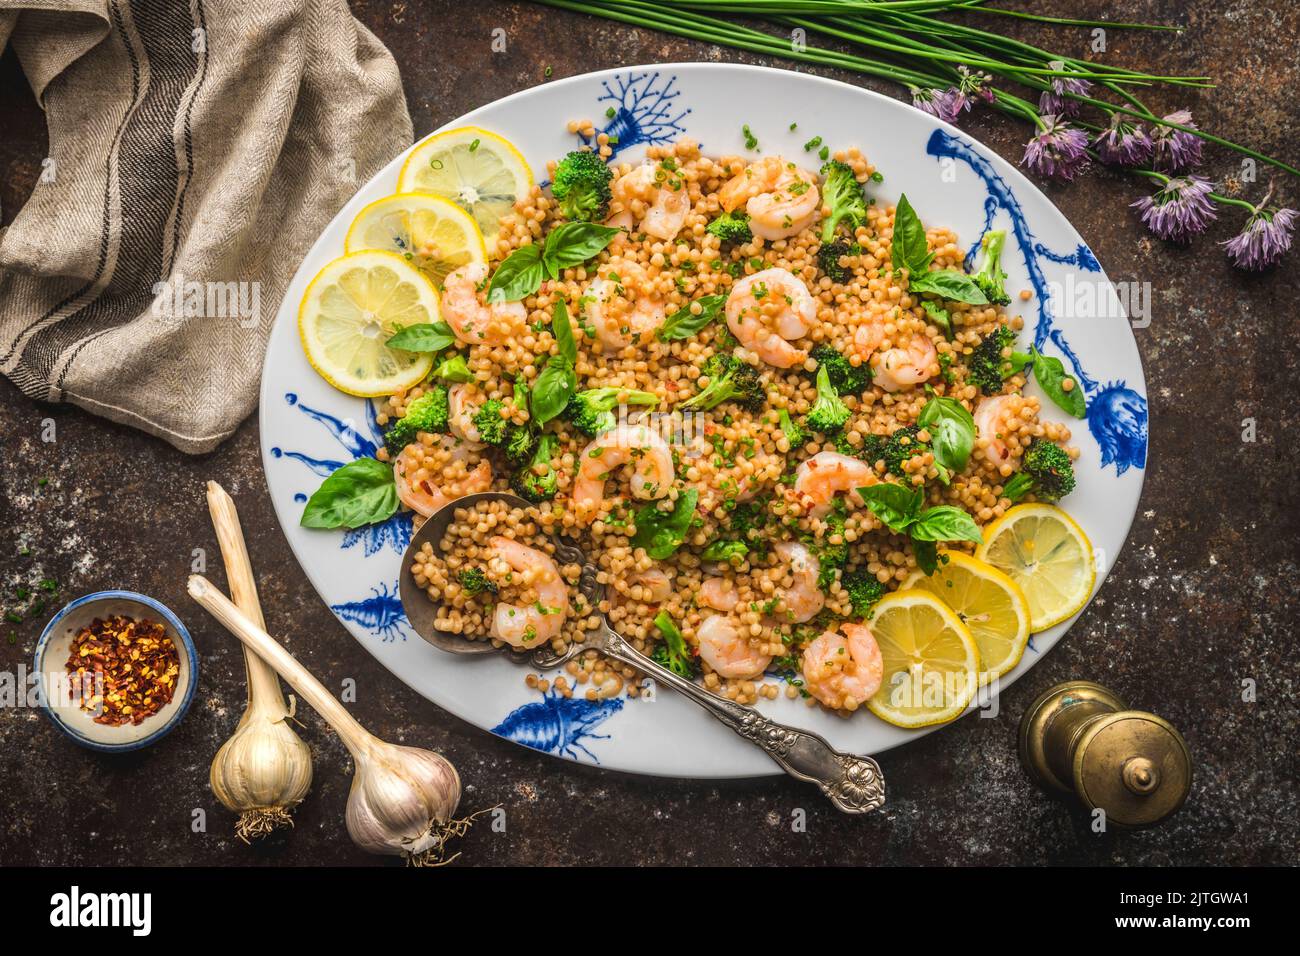 Shrimp with Pearl Couscous and Broccoli on Platter with Chives and Garlic Stock Photo